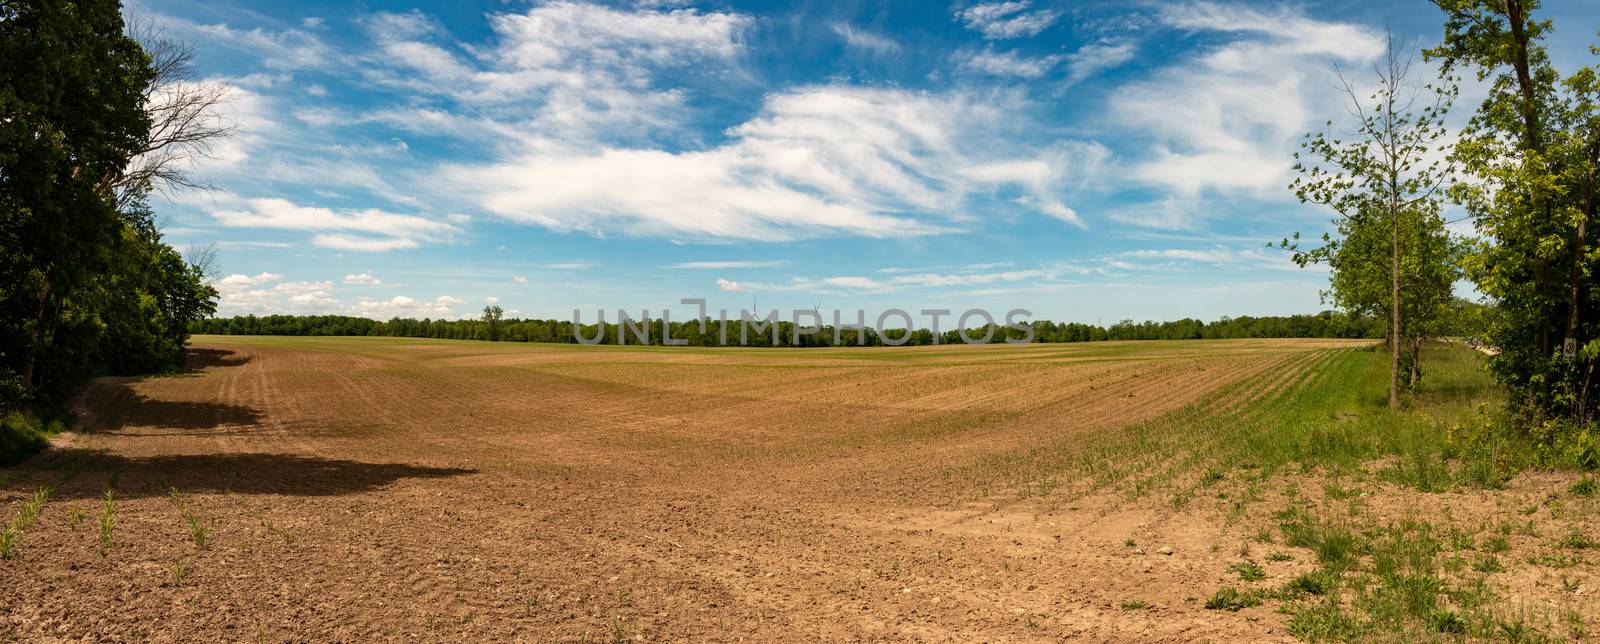 Idyllic rural view of pretty farmland and healthy livestock, in the beautiful surroundings of southern Ontario. by mynewturtle1